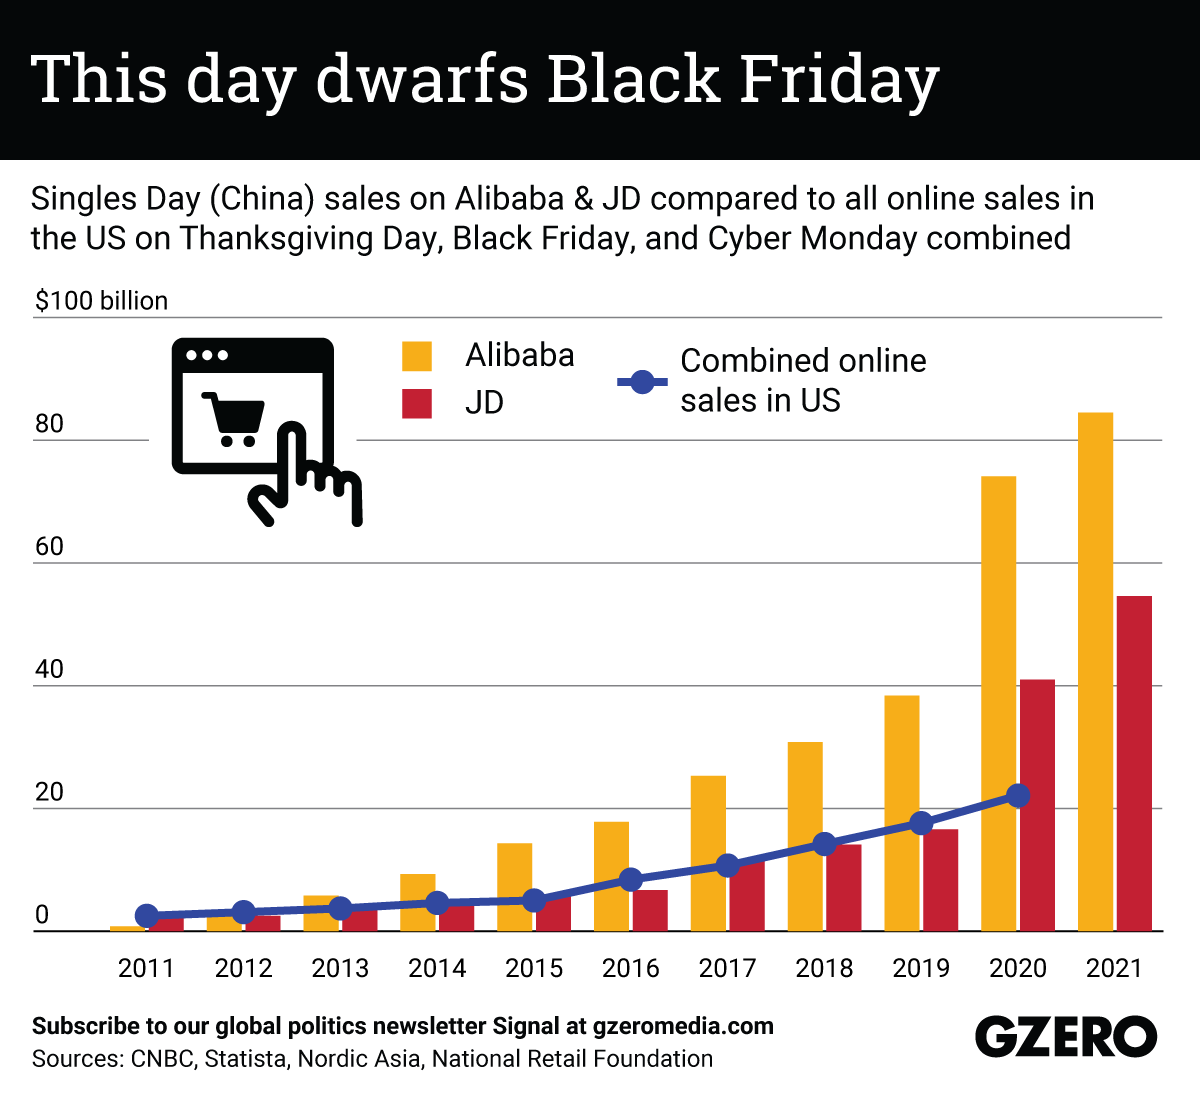 This day dwarfs Black Friday: Singles Day, (China) sales on Alibaba & JD compared to all online sales in the US on Thanksgiving Day, Black Friday, and Cyber Monday combined.